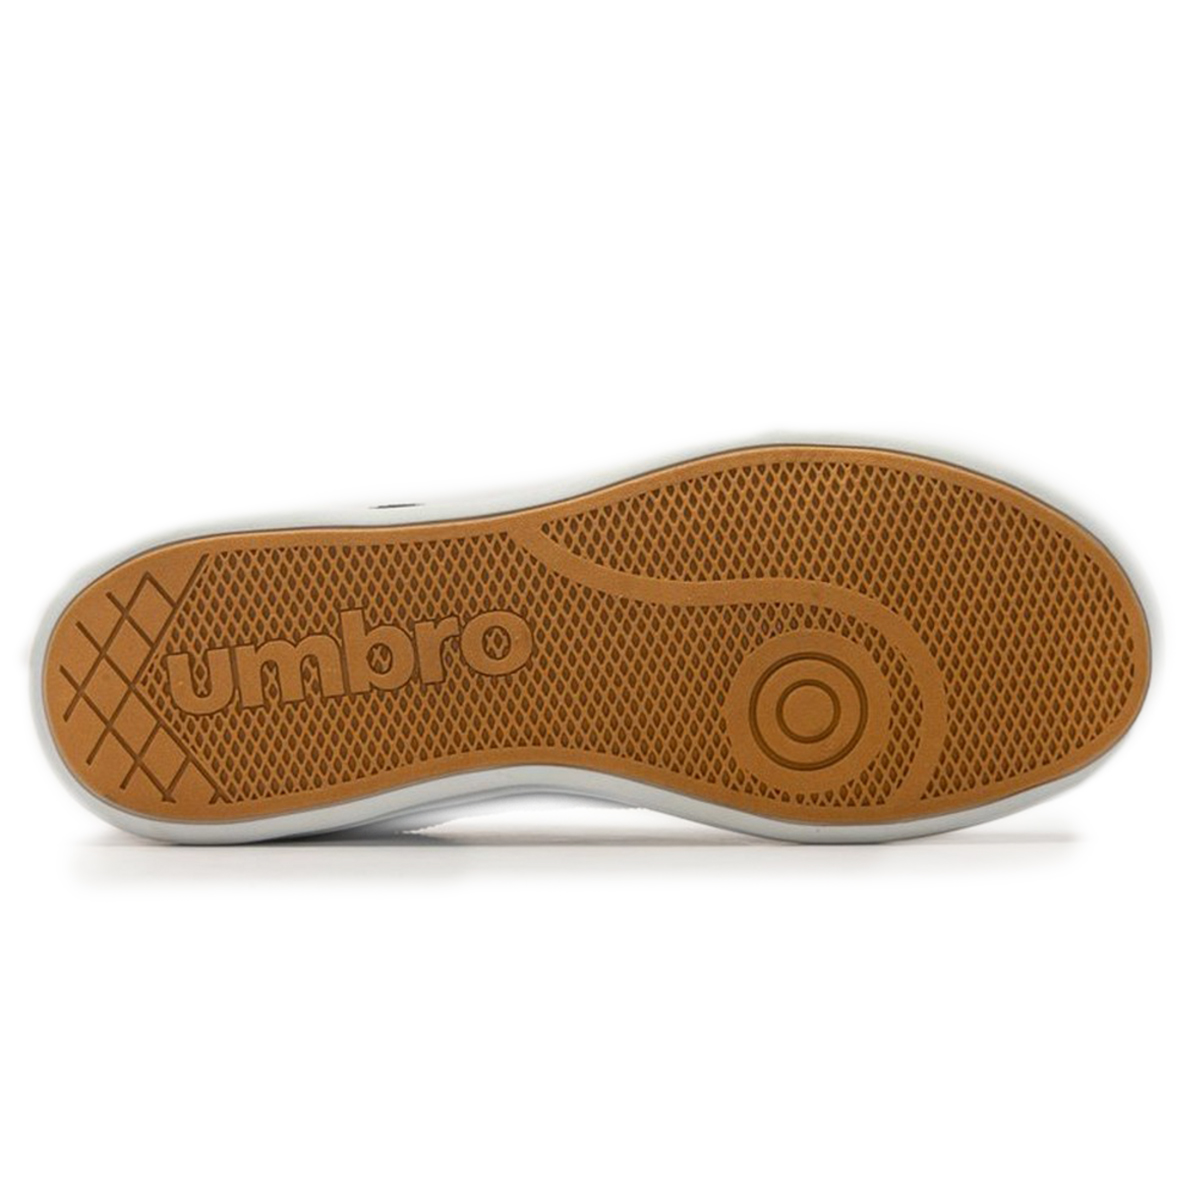 Zapatillas Umbro Speciali Hup,  image number null